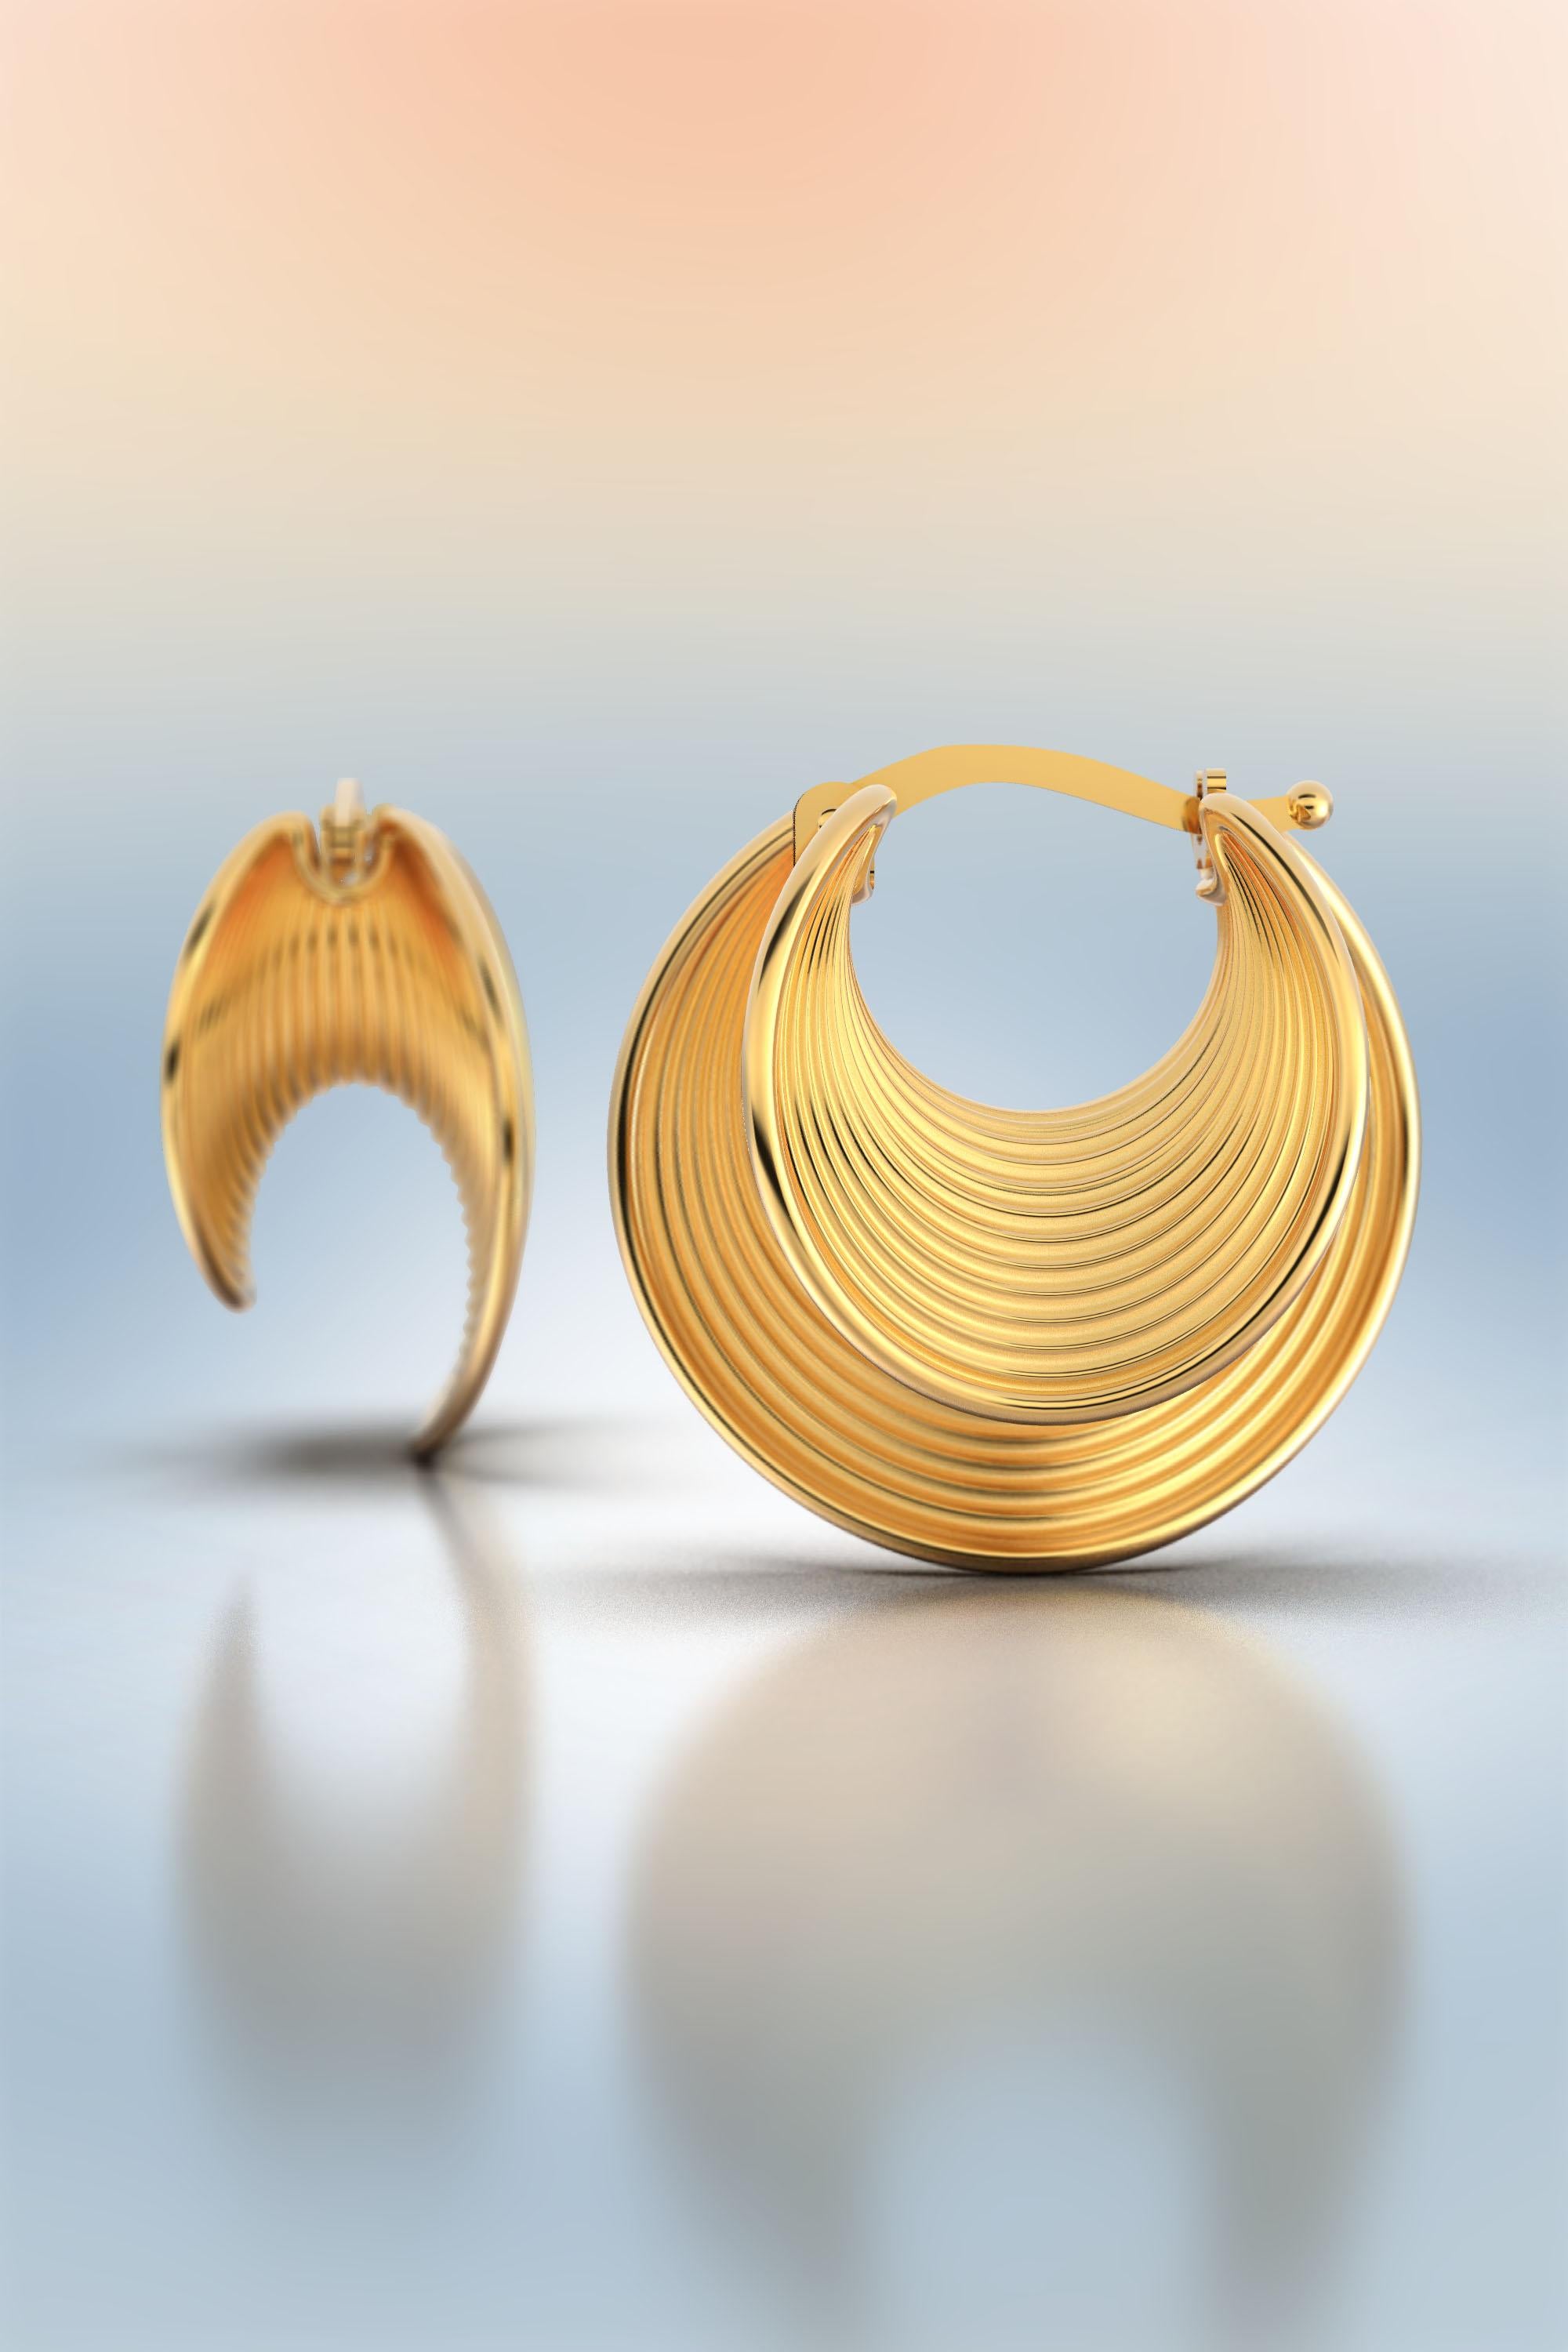 21 mm diameter beautiful hoop earrings crafted in polished and raw solid gold 14k 
Available in yellow gold, rose gold and white gold
The earrings are secured by a trusty snap closure.
The approximate total weight is 5,2 grams in 14k 
The production